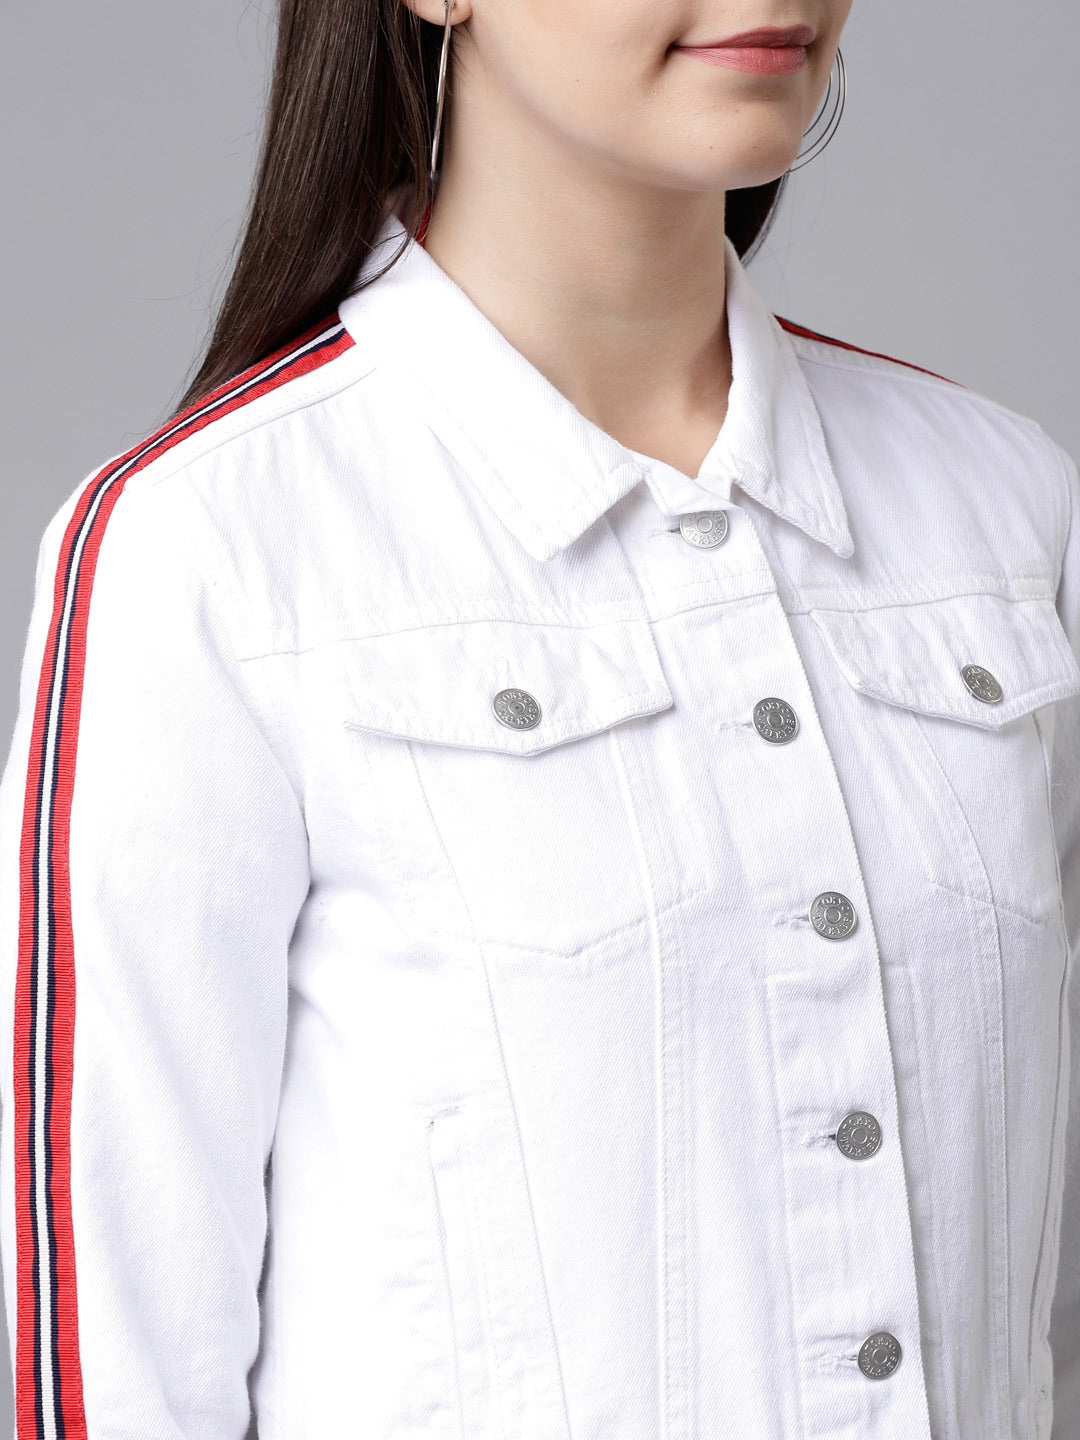 White denim jacket with red stripe detail, casual women's fashion apparel